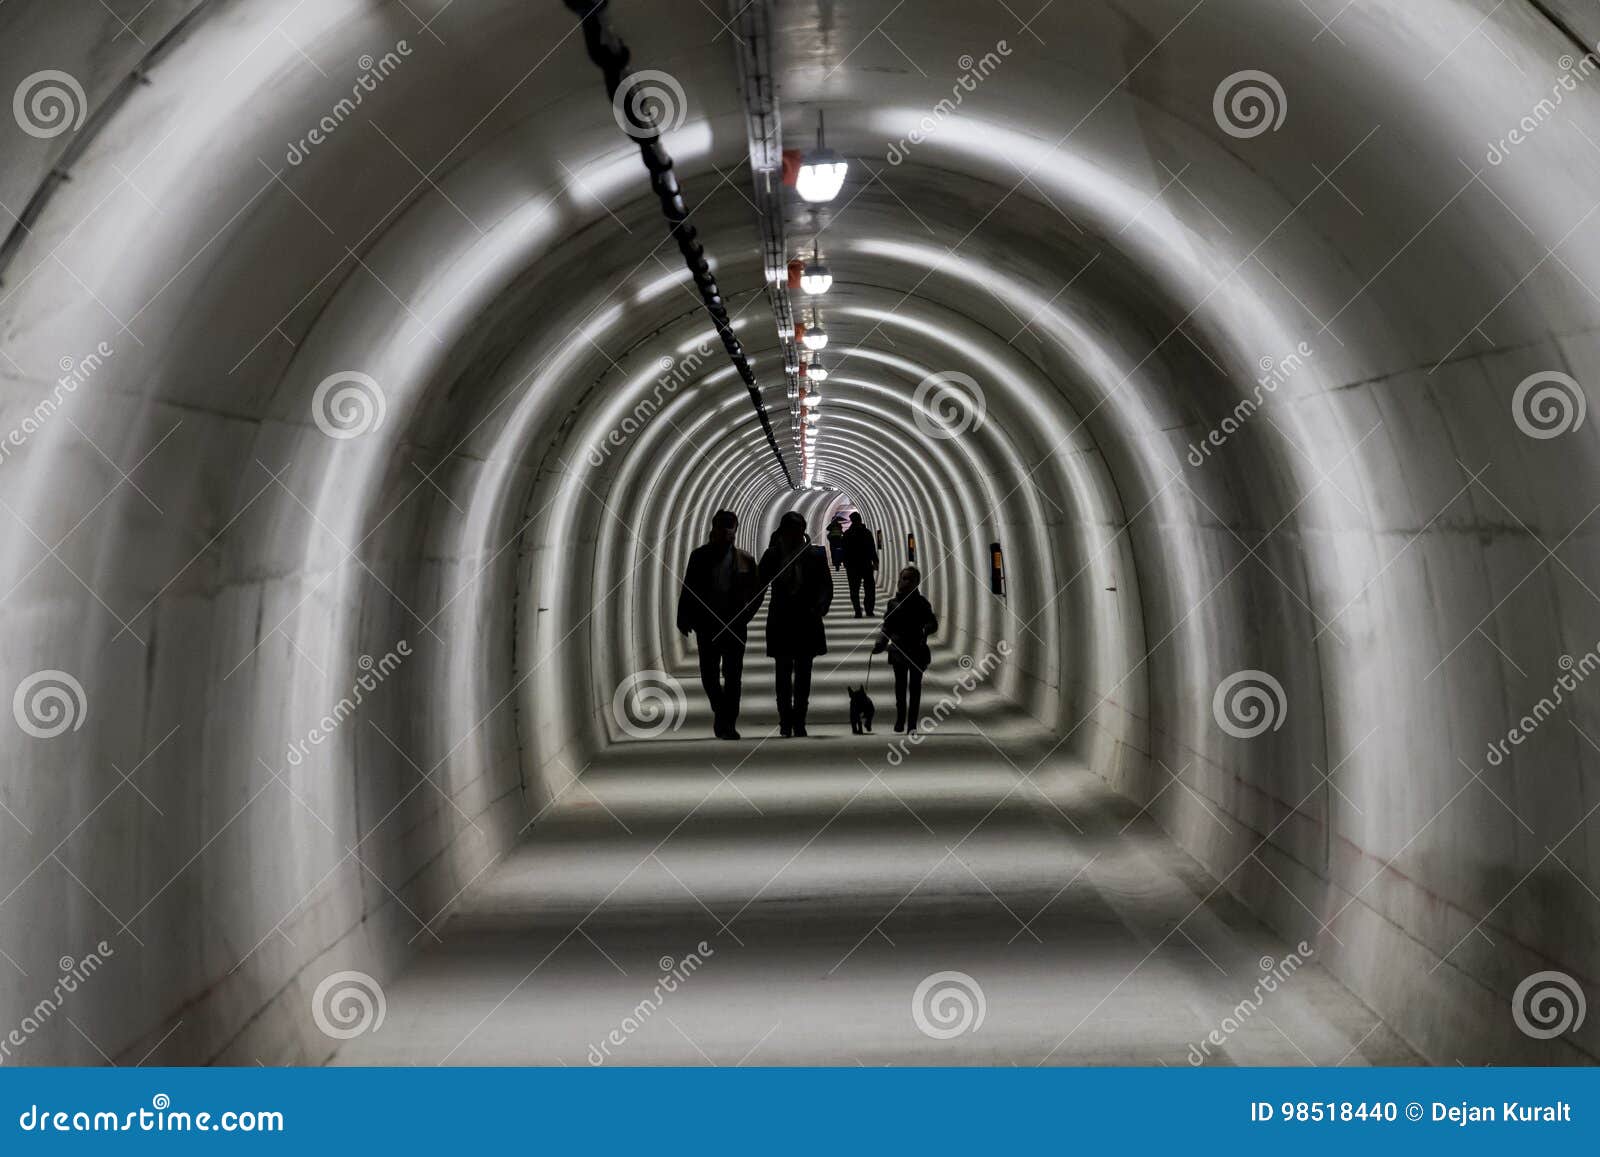 Silhouette Of People Walking Stock Photo - Image of young, shadow: 98518440 Silhouette Man Walking Tunnel